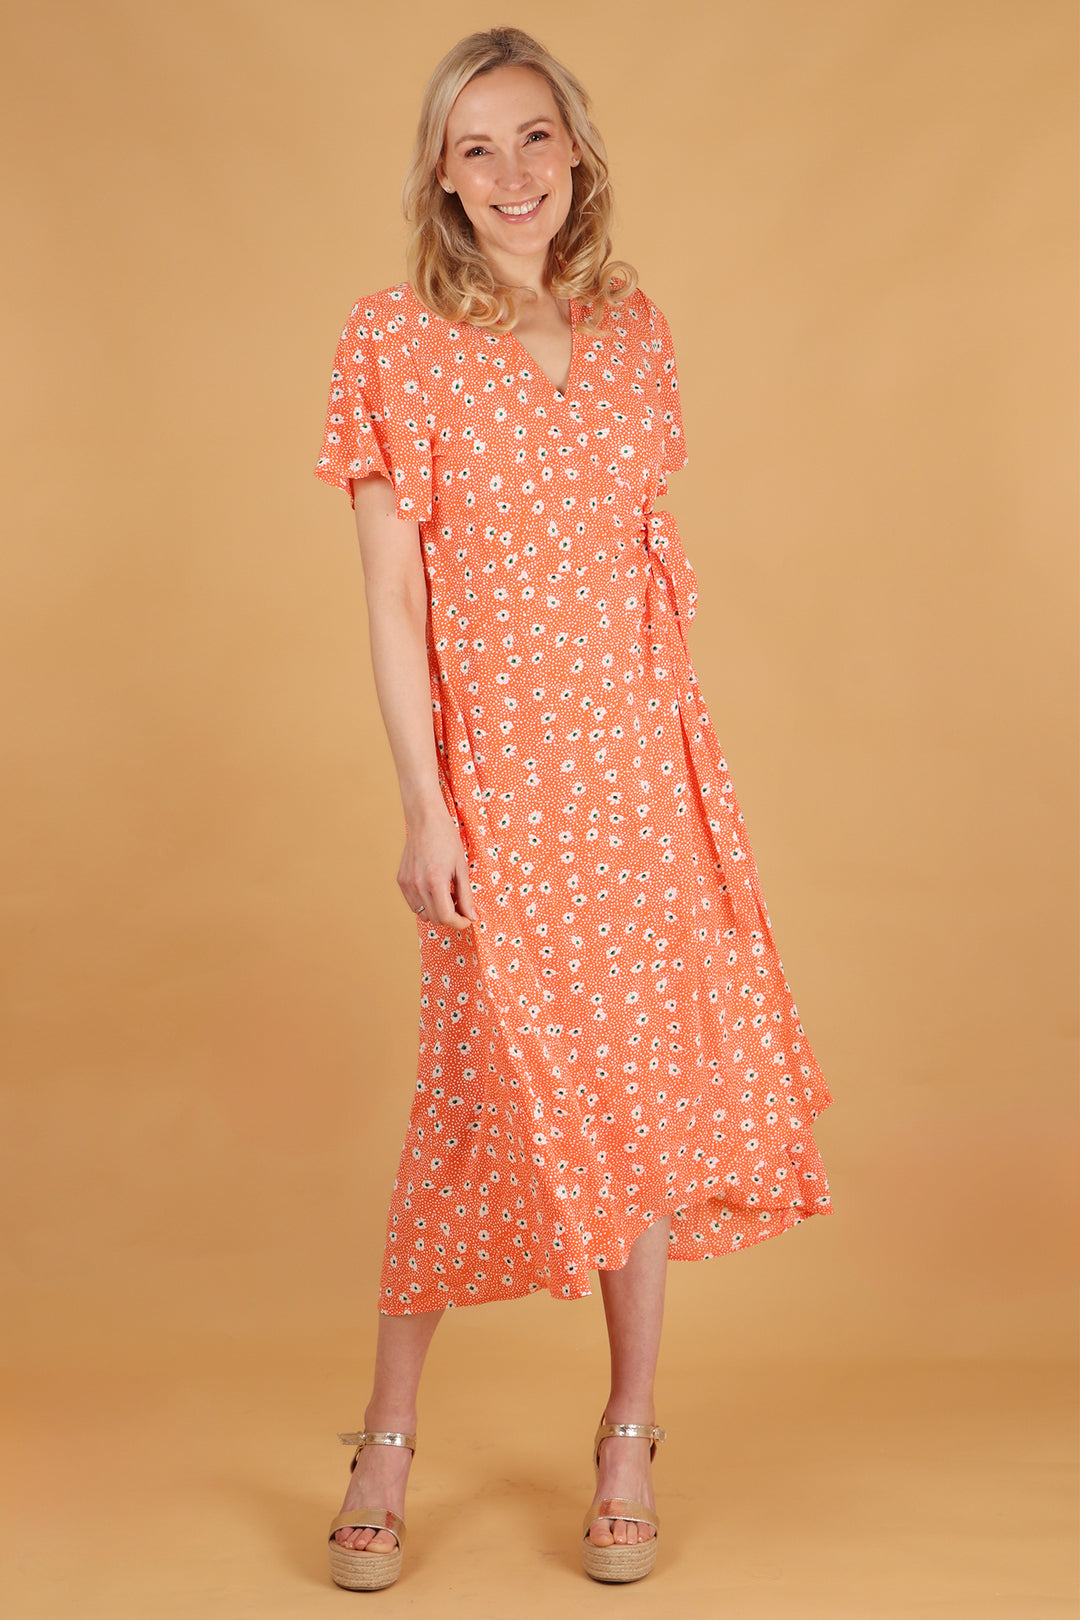 model wearing an orange midi length wrap dress with an all over white daisy floral pattern. the dress has short sleeves, waist tie and vneck